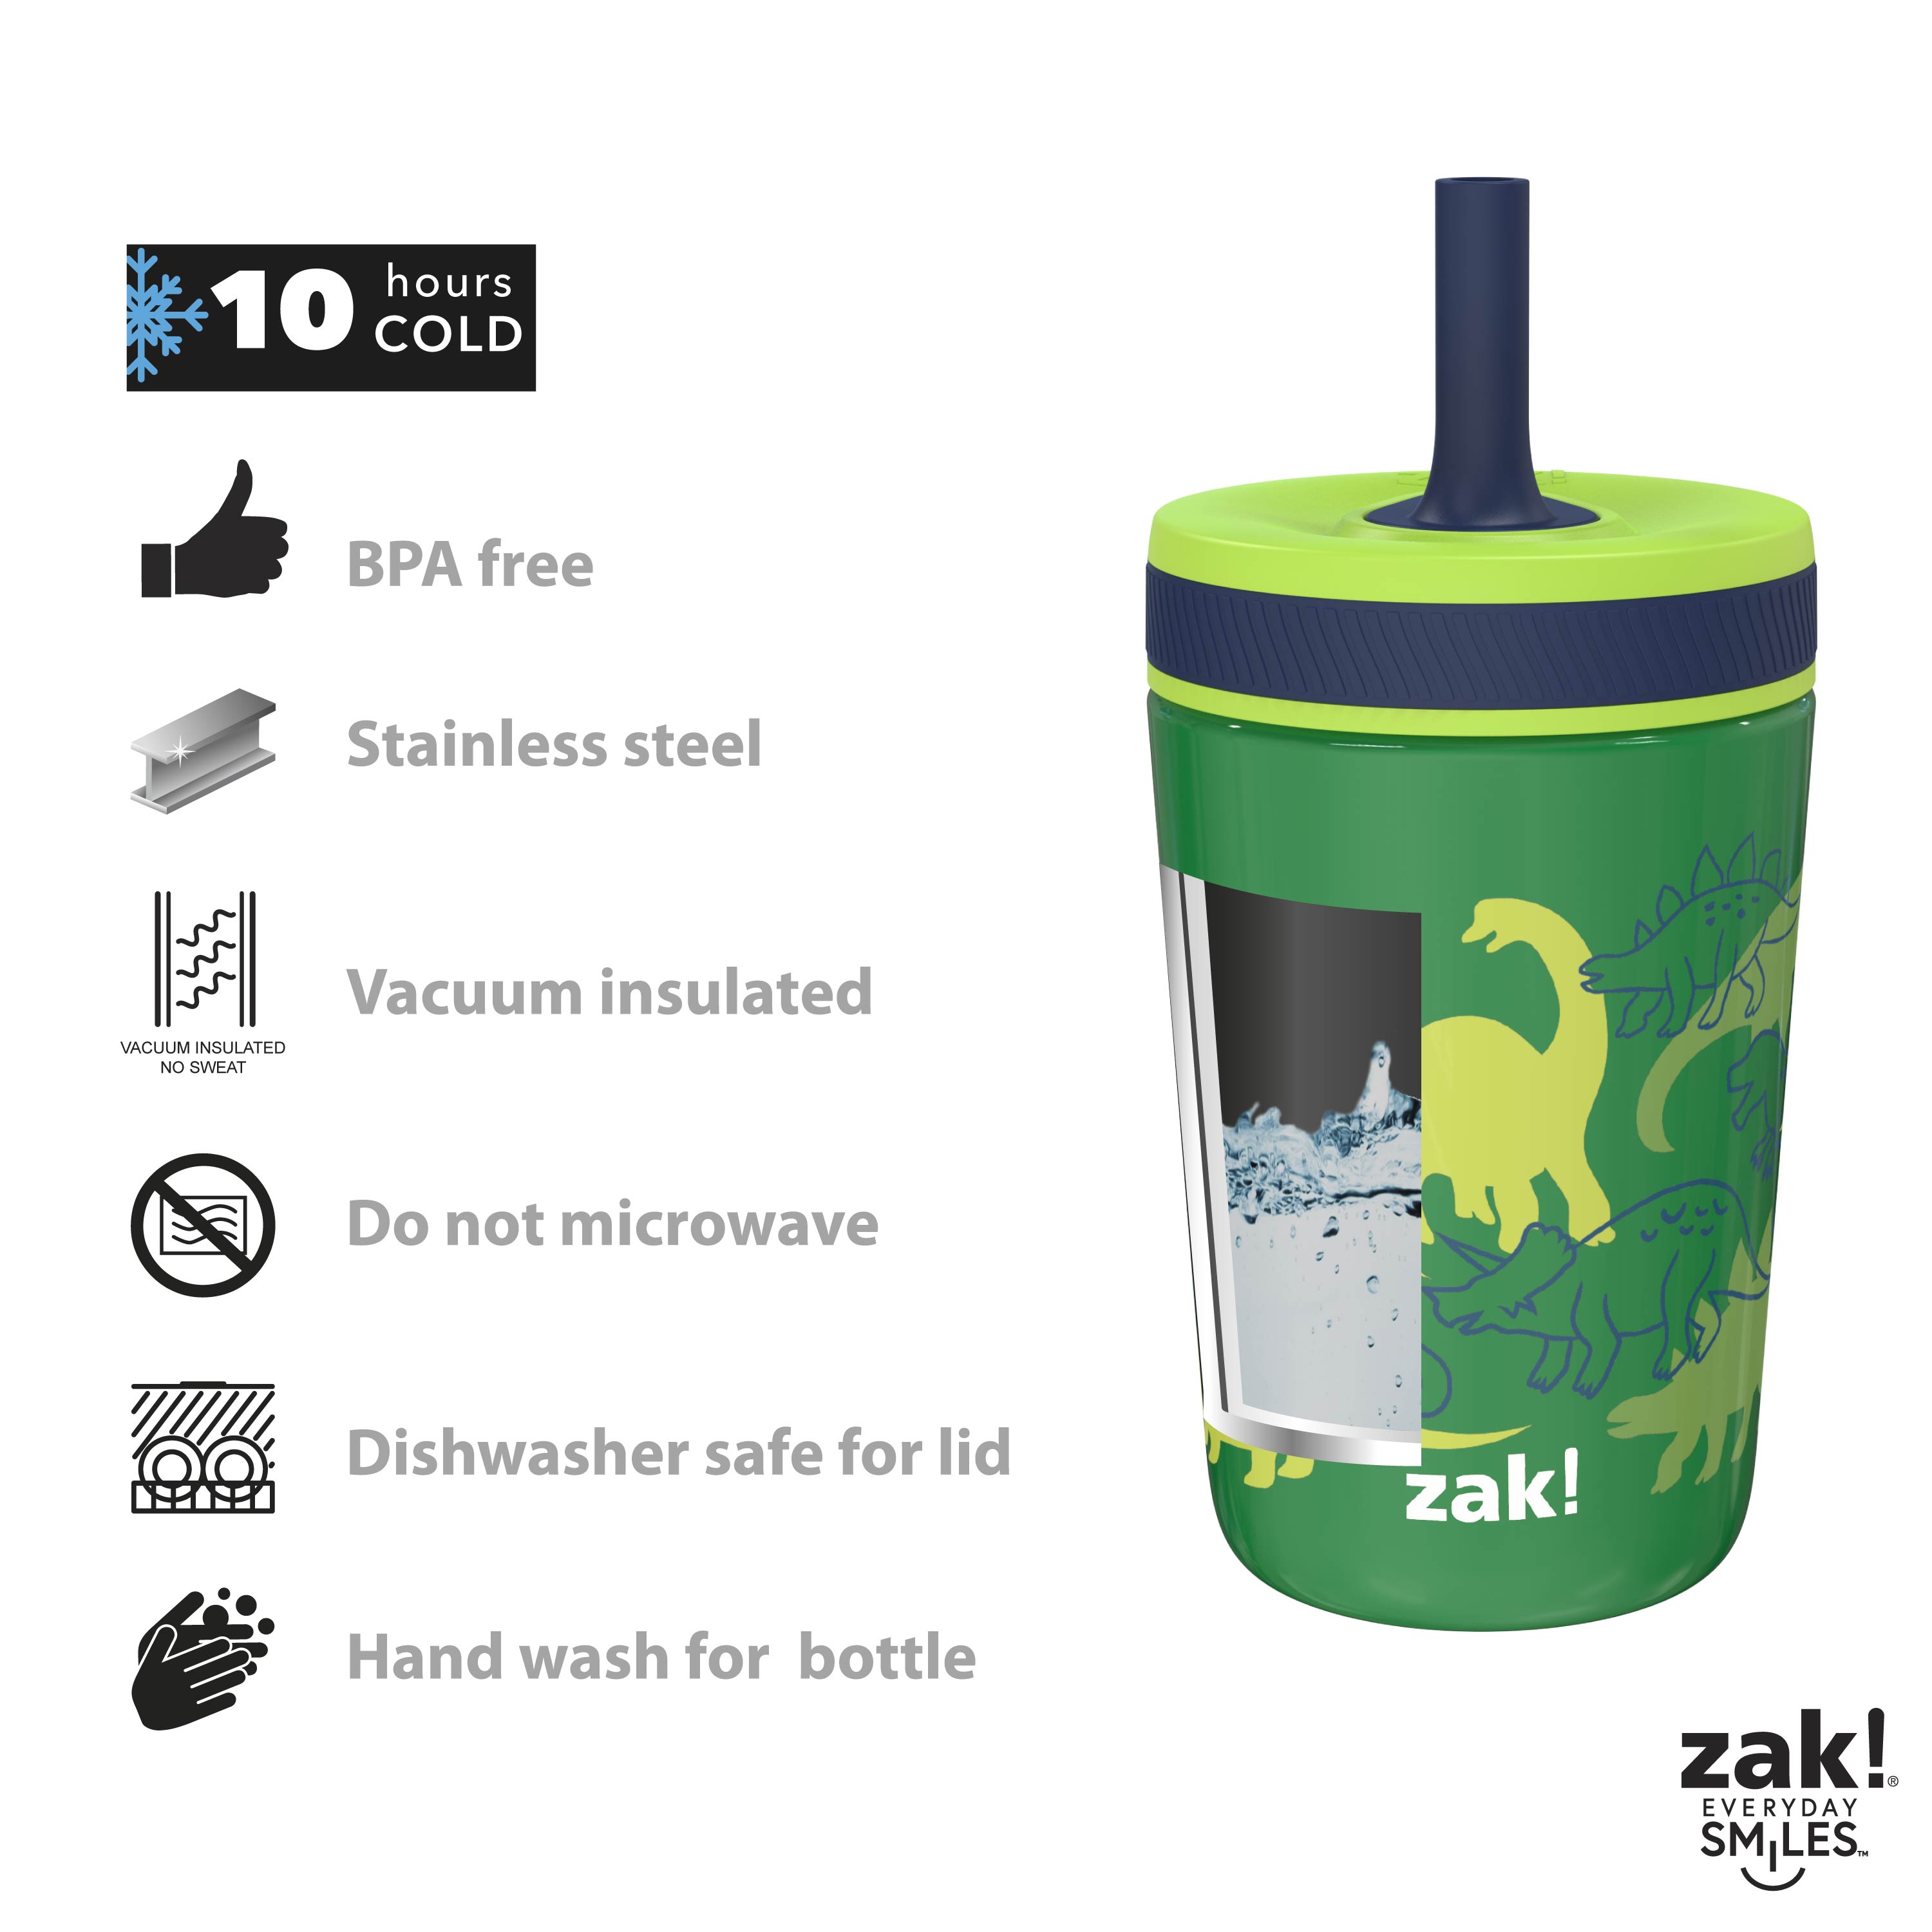 DLC 20oz Gaming Insulated Tumbler – Don't Lag Coffee